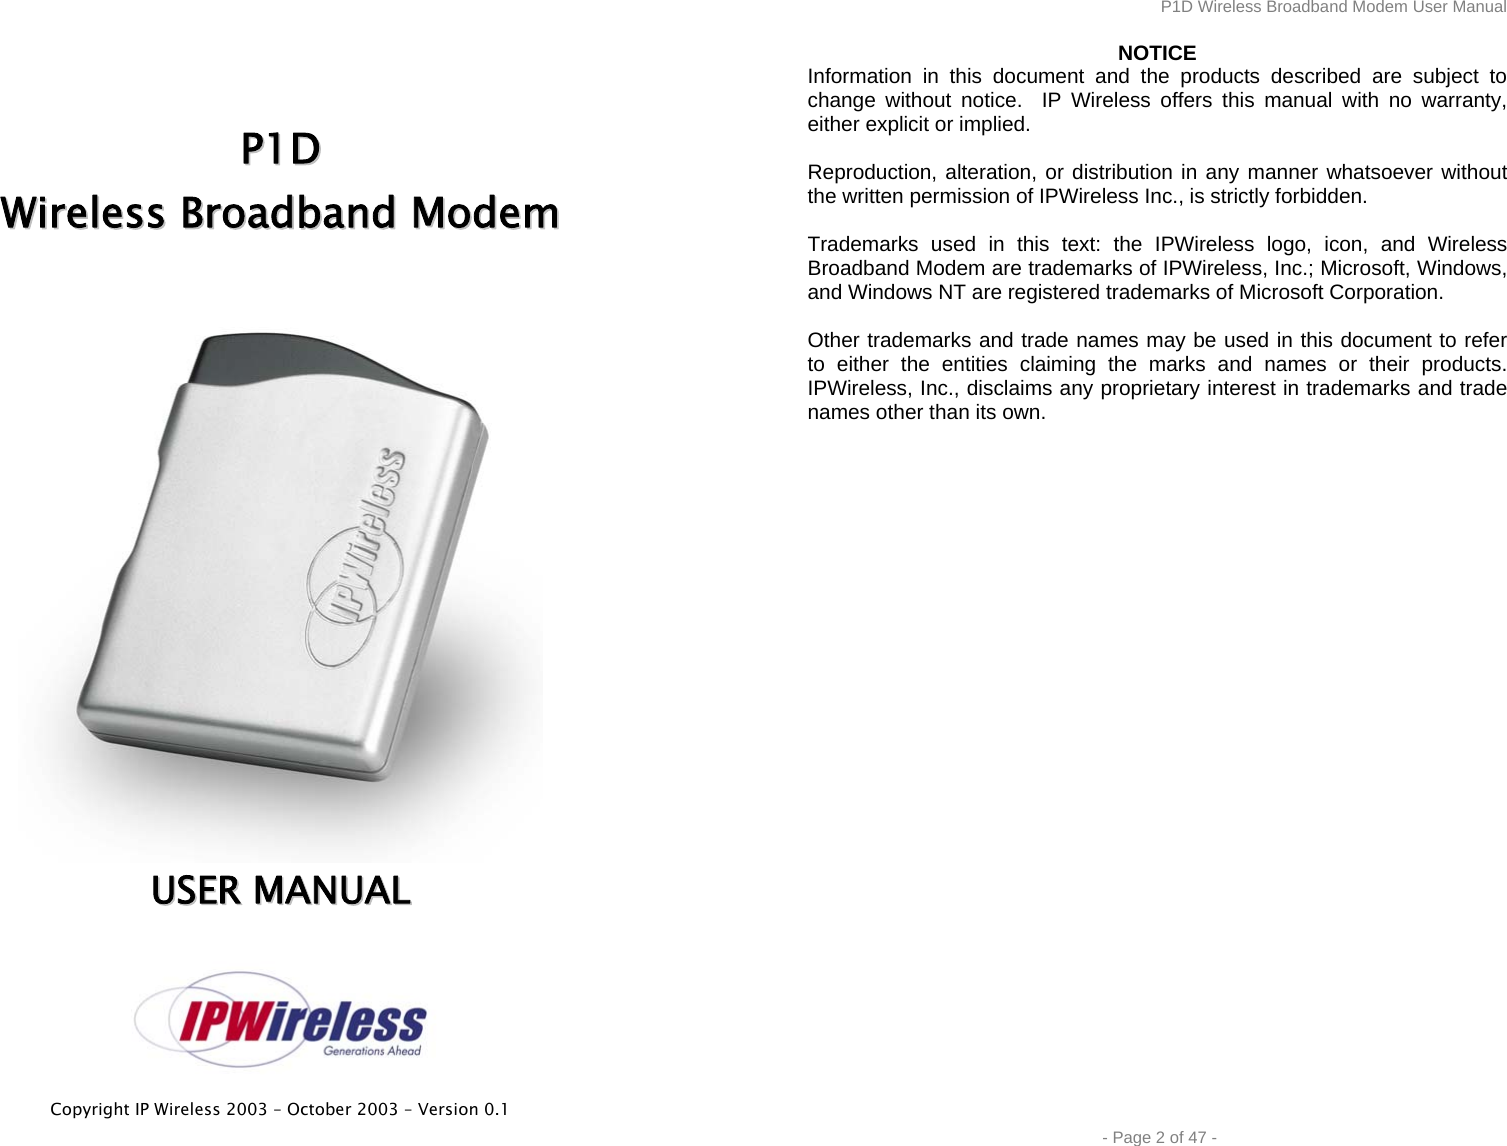  Copyright IP Wireless 2003 – October 2003 – Version 0.1     PP11DD  WWiirreelleessss  BBrrooaaddbbaanndd  MMooddeemm    UUSSEERR  MMAANNUUAALL  P1D Wireless Broadband Modem User Manual  - Page 2 of 47 - NOTICE Information in this document and the products described are subject to change without notice.  IP Wireless offers this manual with no warranty, either explicit or implied.  Reproduction, alteration, or distribution in any manner whatsoever without the written permission of IPWireless Inc., is strictly forbidden.  Trademarks used in this text: the IPWireless logo, icon, and Wireless Broadband Modem are trademarks of IPWireless, Inc.; Microsoft, Windows, and Windows NT are registered trademarks of Microsoft Corporation.  Other trademarks and trade names may be used in this document to refer to either the entities claiming the marks and names or their products. IPWireless, Inc., disclaims any proprietary interest in trademarks and trade names other than its own. 